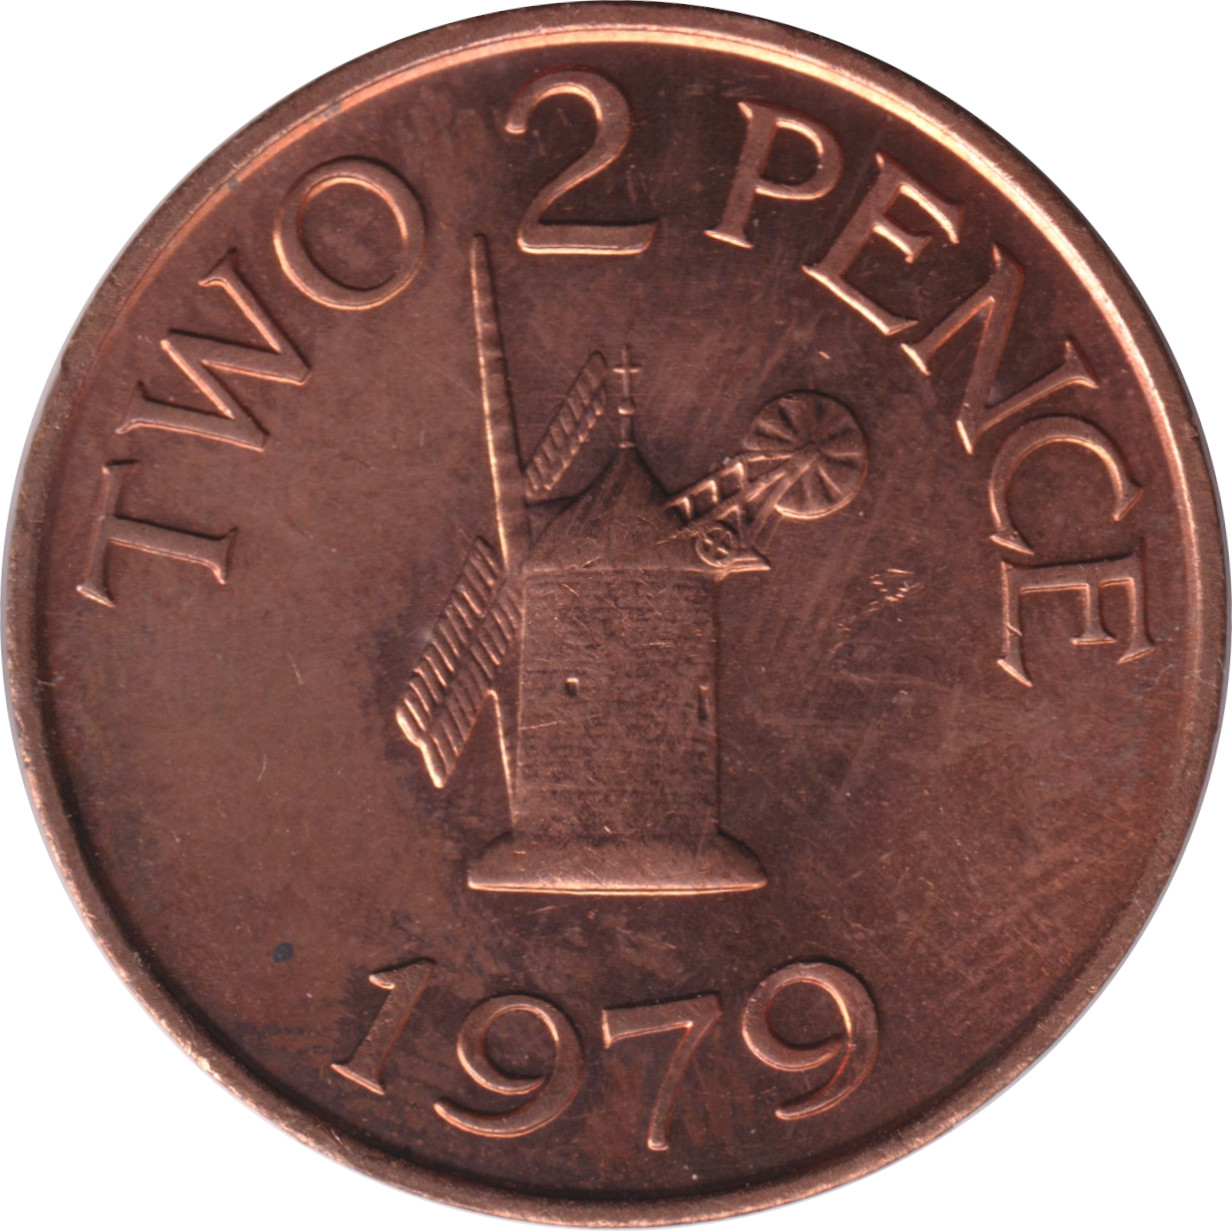 2 pence - Moulin - Two pence